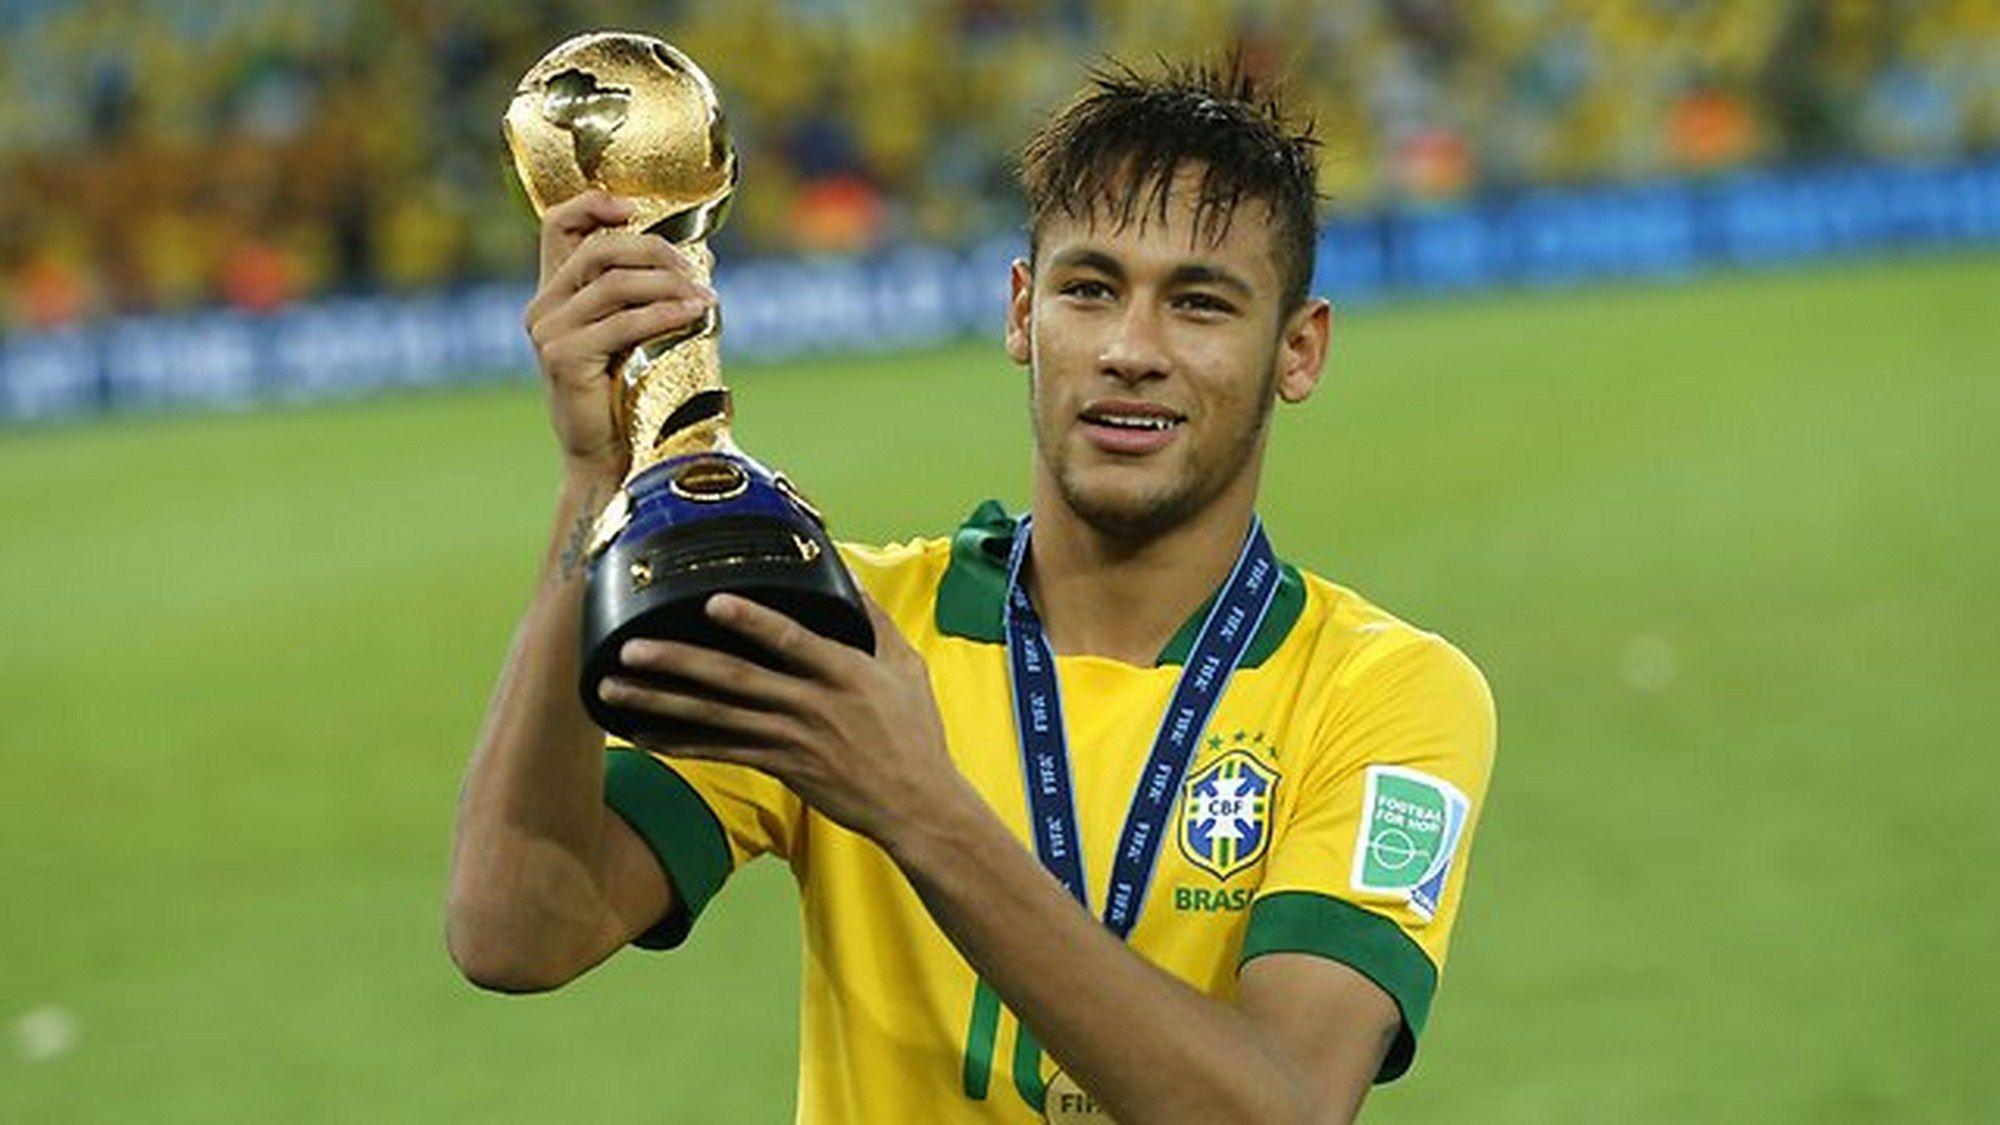 Neymar 2016 HD Quality for PC & Mac, Laptop, Tablet, Mobile Phone